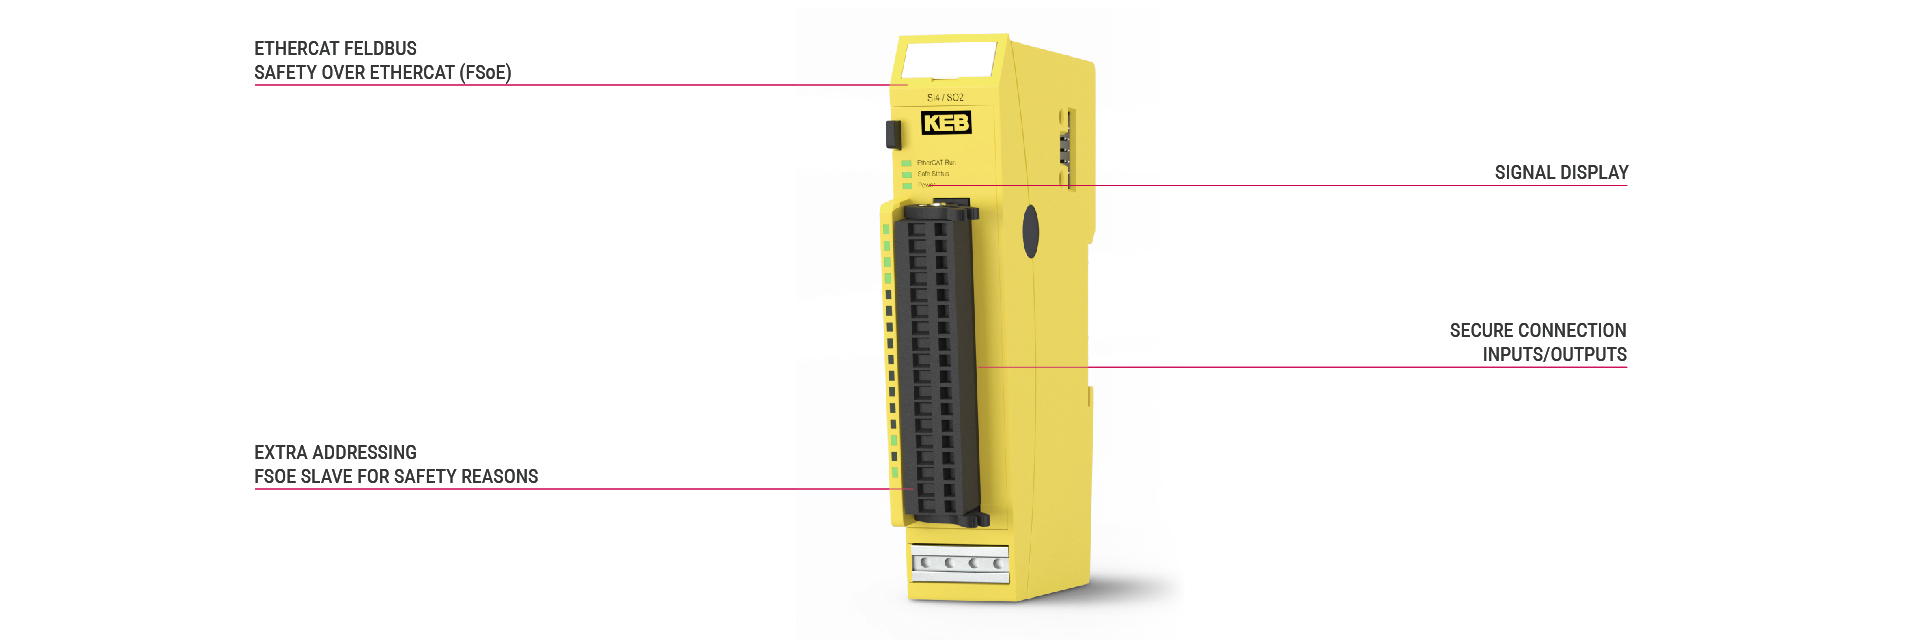 Product presentation with features of the safety controller C6 Safety I/O 